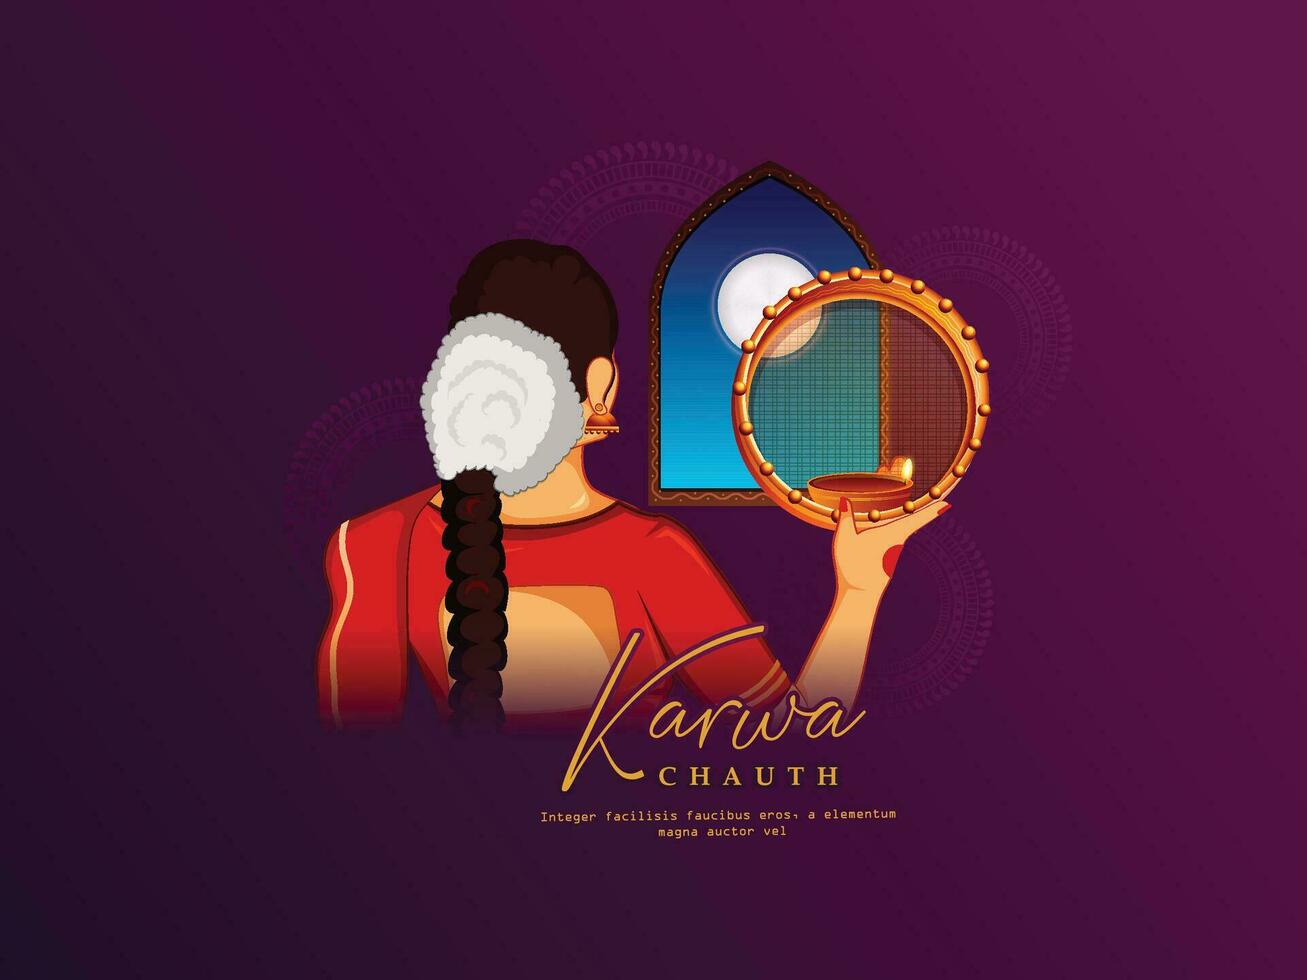 Karwa Chauth is a festival celebrated by Hindu women vector